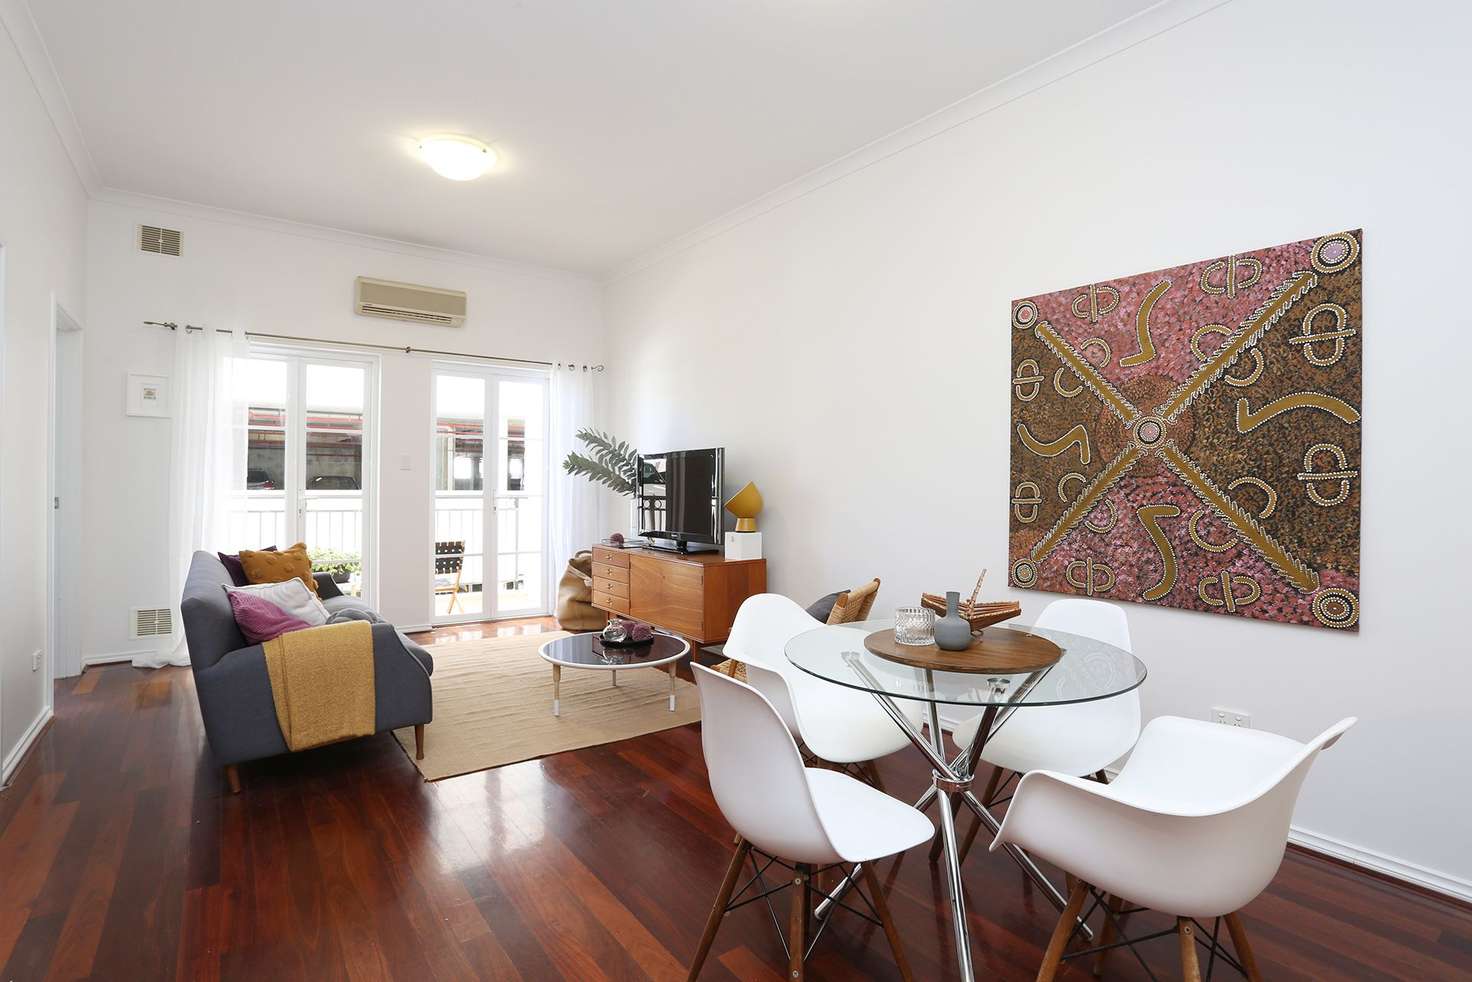 Main view of Homely apartment listing, 11/2 Mayfair Street, West Perth WA 6005